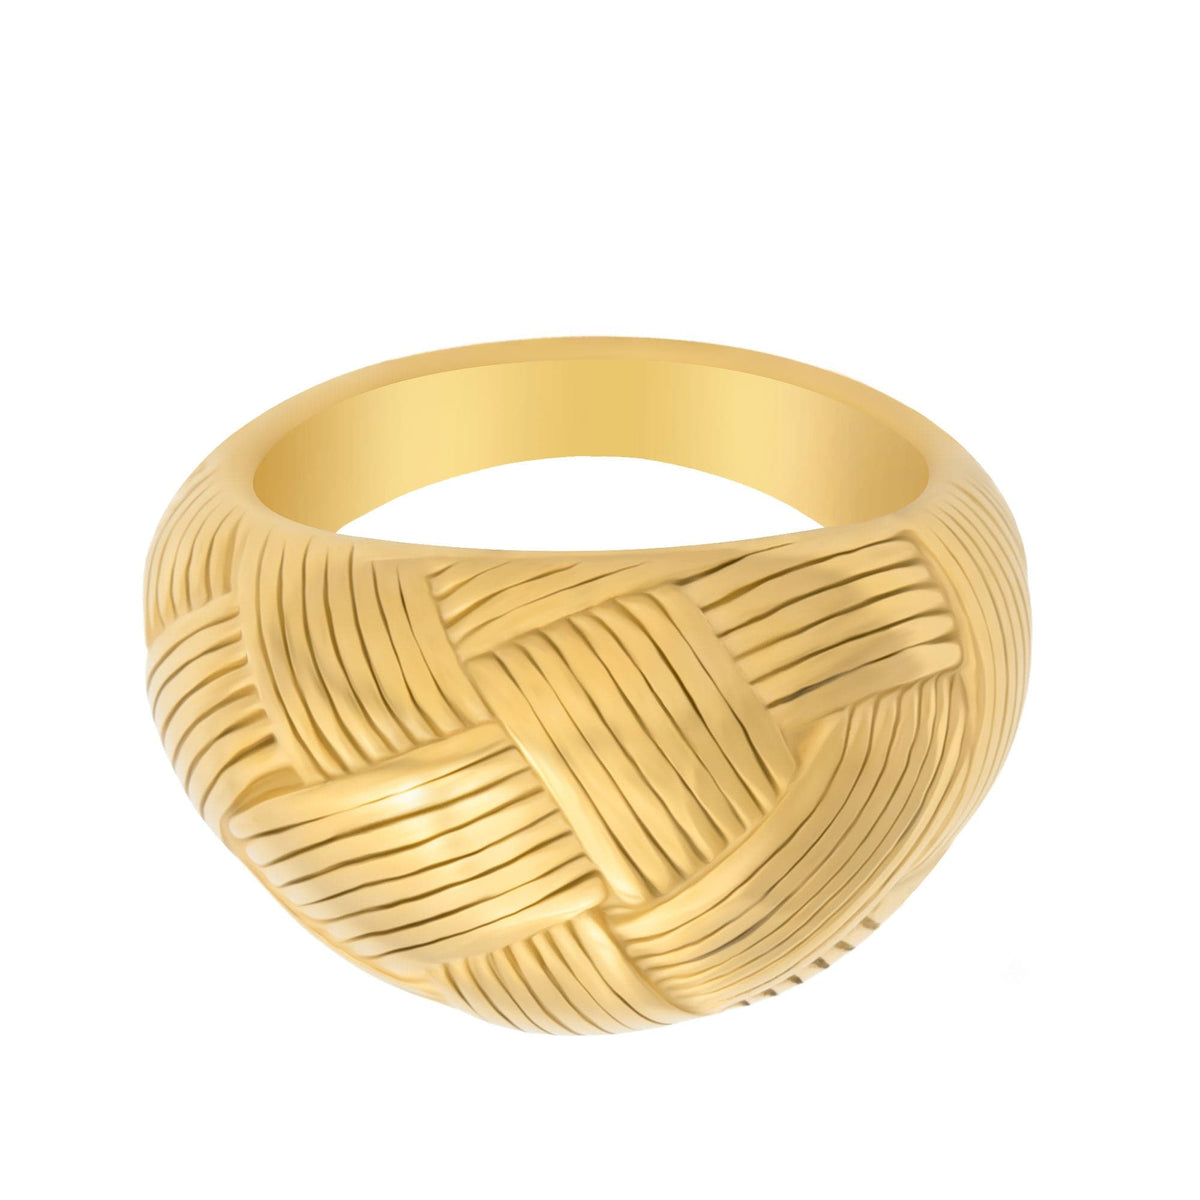 BohoMoon Stainless Steel Stefania Ring Gold / US 6 / UK L / EUR 51 (small)